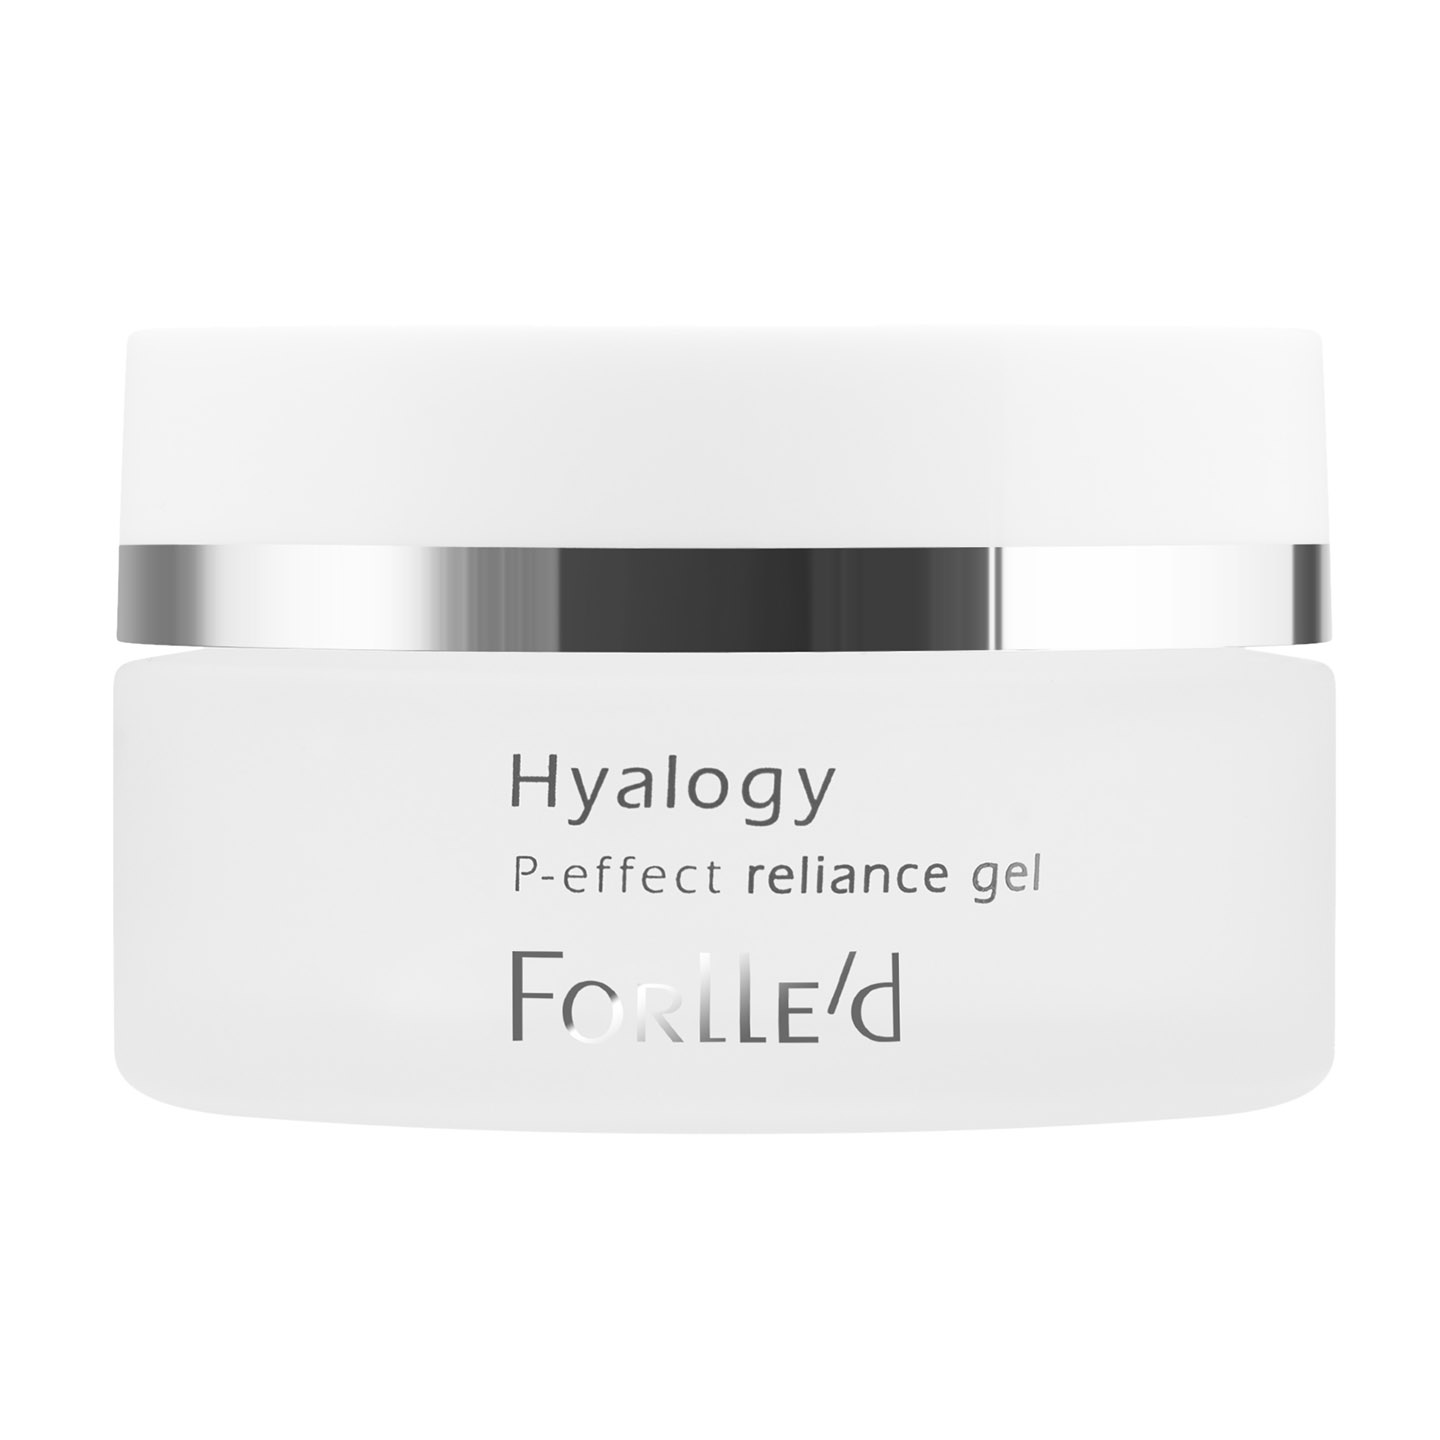 Hyalogy P-effect reliance gel DOM